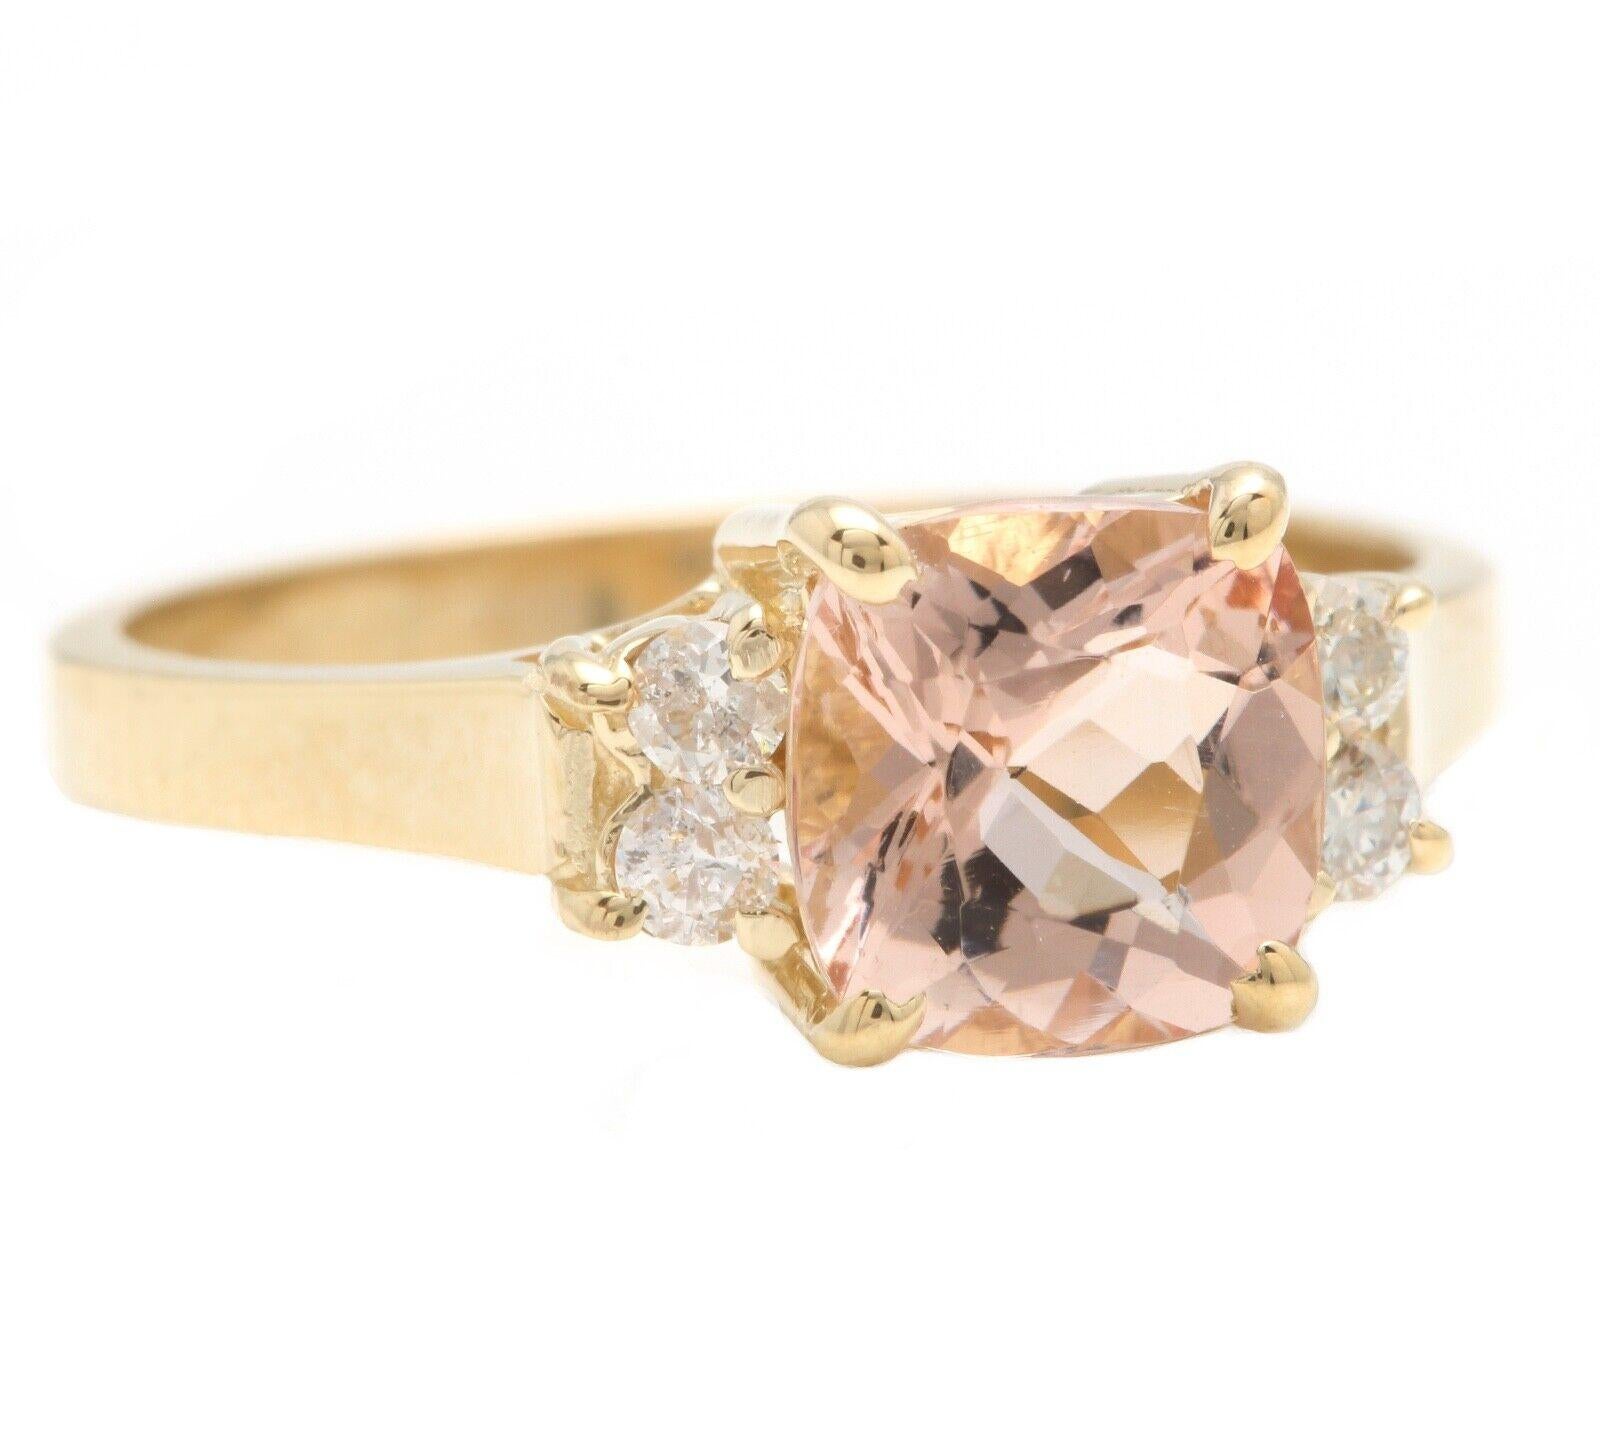 1.42 Carats Impressive Natural Morganite and Diamond 14K Solid Yellow Gold Ring

Suggested Replacement Value: Approx. $3,500.00

Total Morganite Weight is: Approx. 1.30 Carats

Morganite Treatment: Heating

Morganite Measures: Approx. 7.00 x